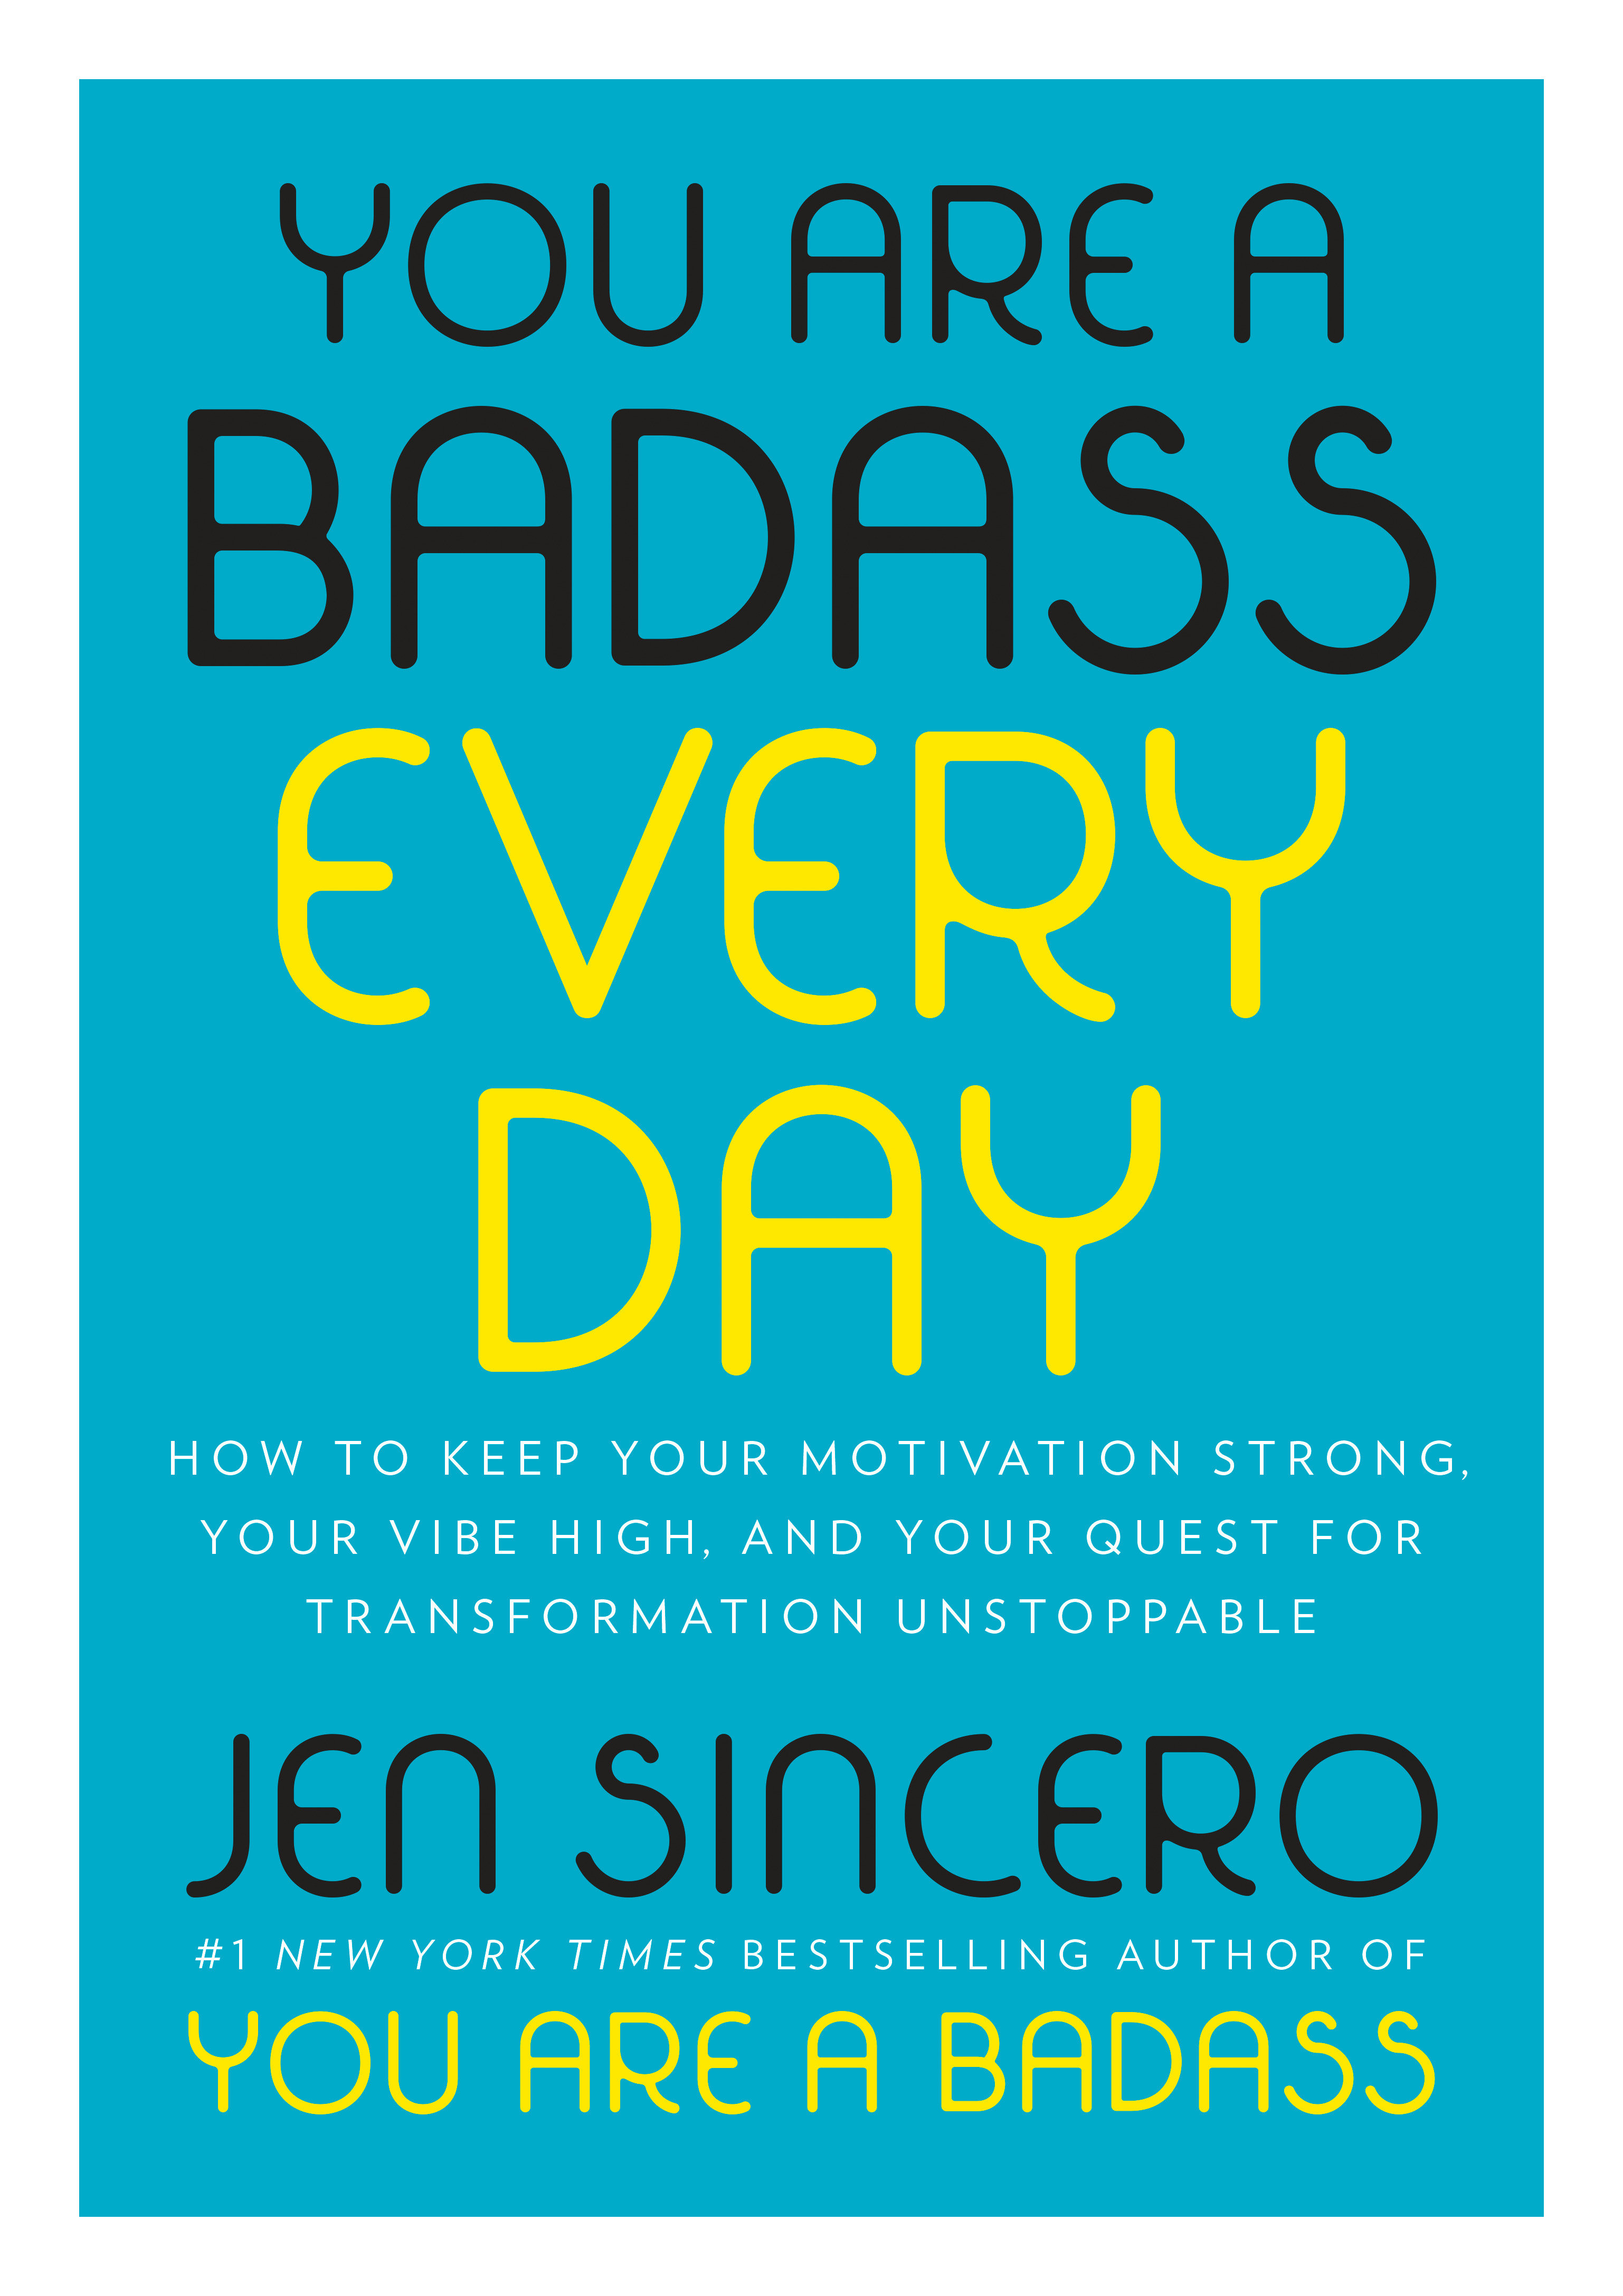 You Are A Badass Every Day (Hardcover Book)